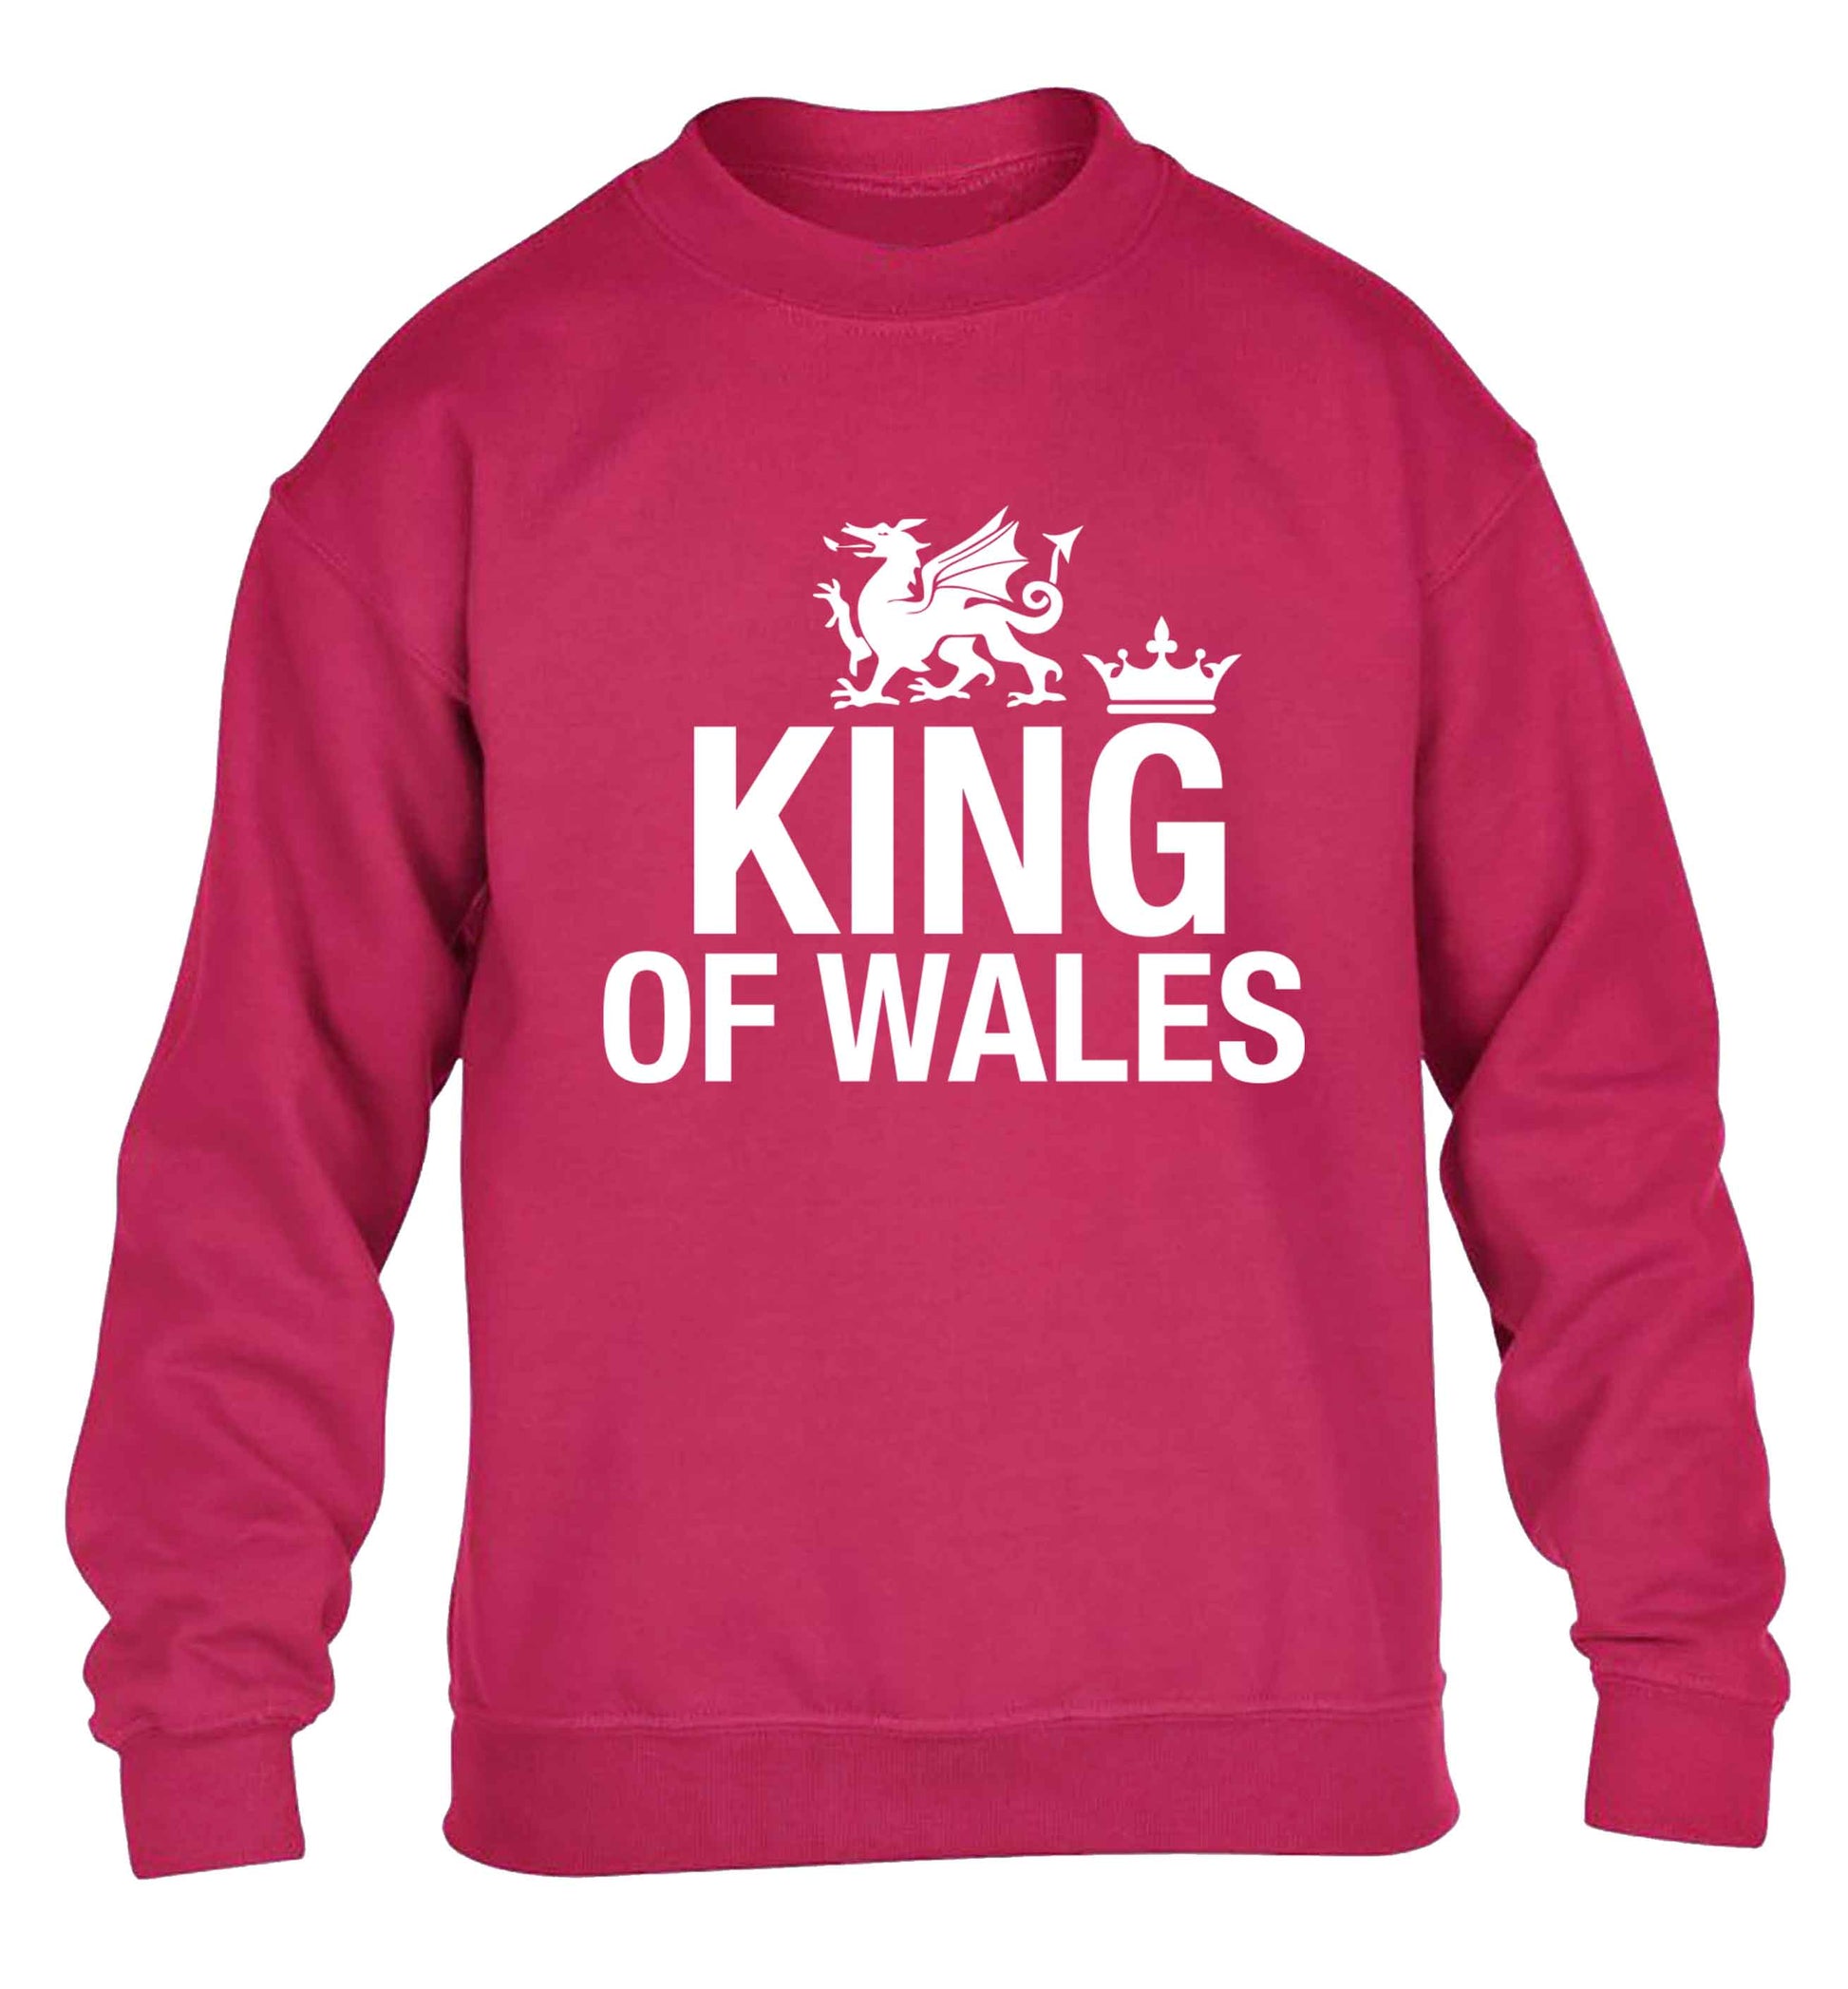 King of Wales children's pink sweater 12-13 Years